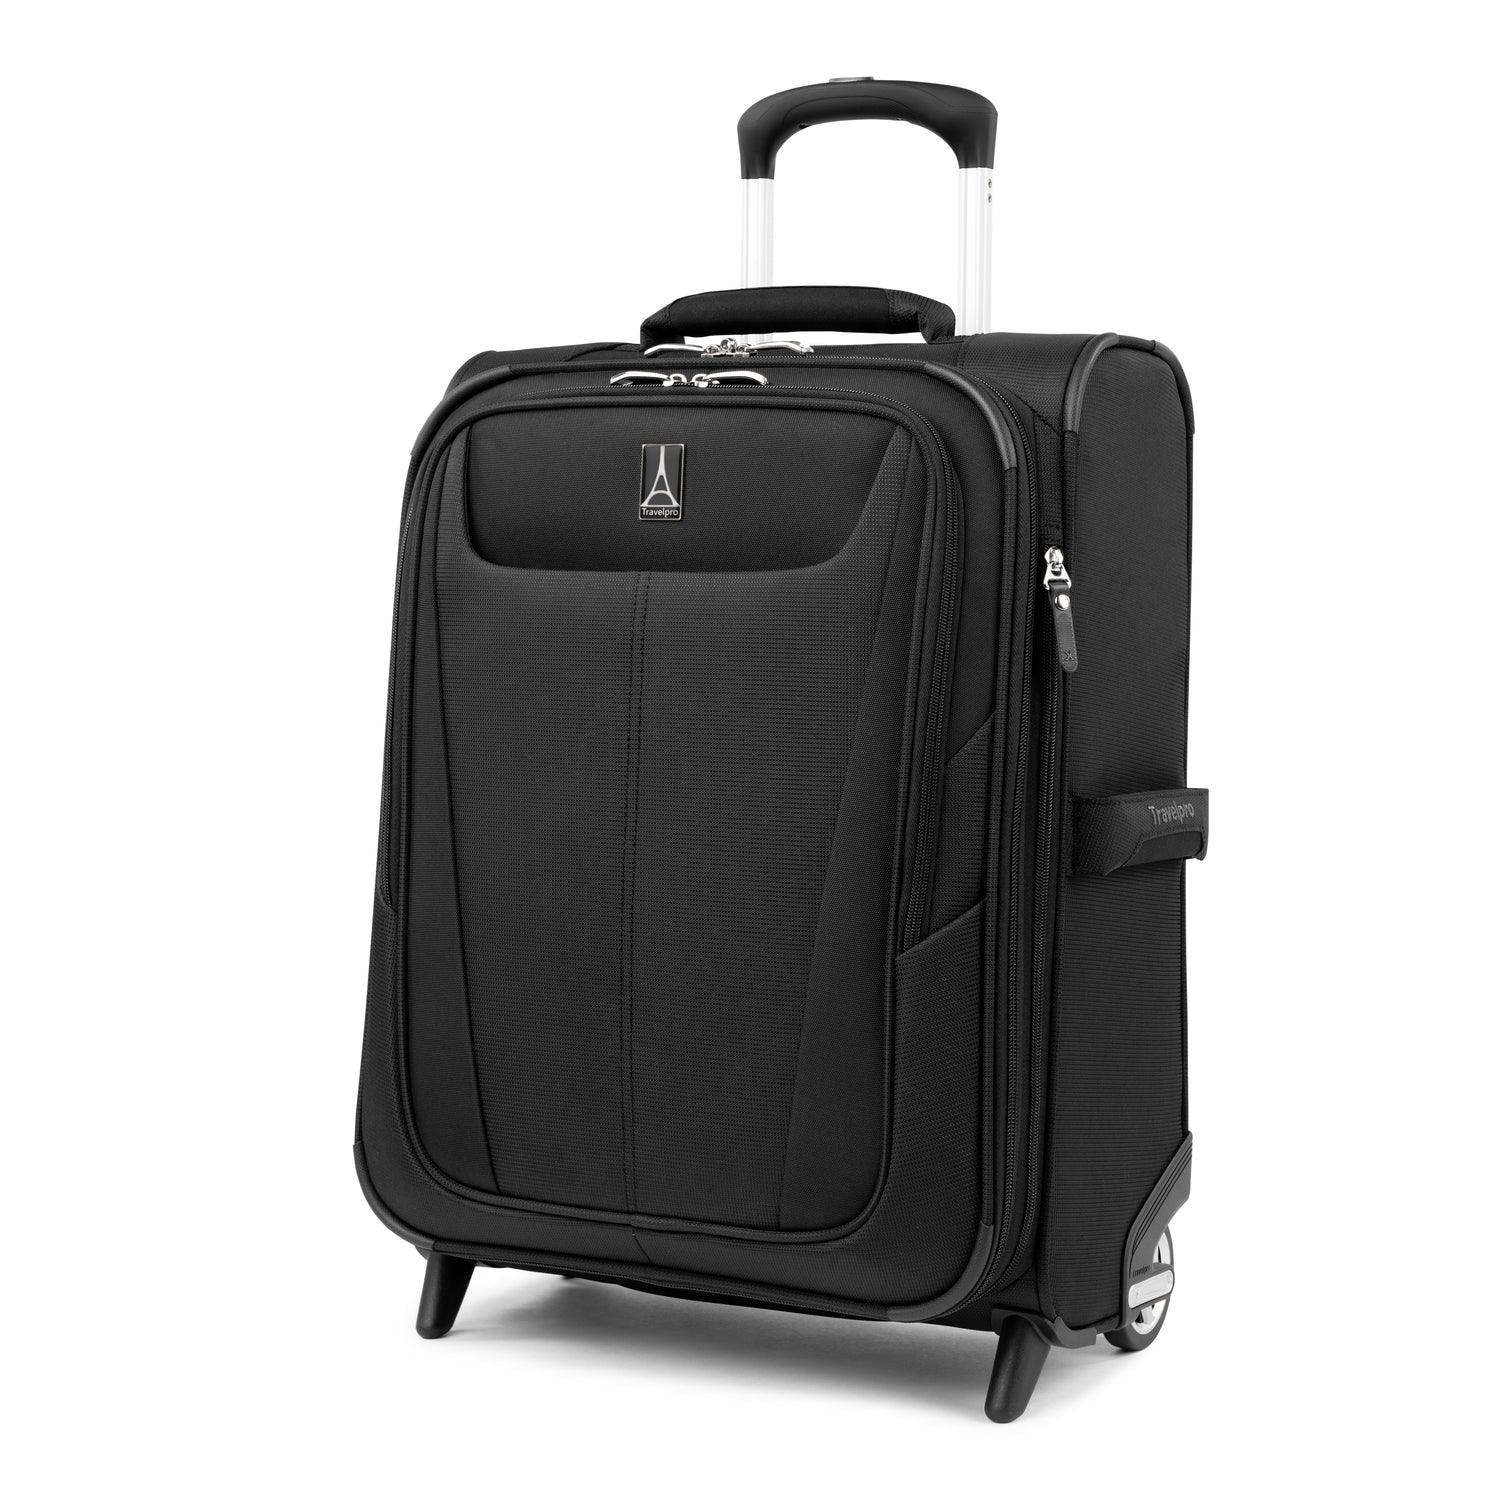 Maxlite 5 International Carry-On Expandable Rollaboard - Voyage Luggage